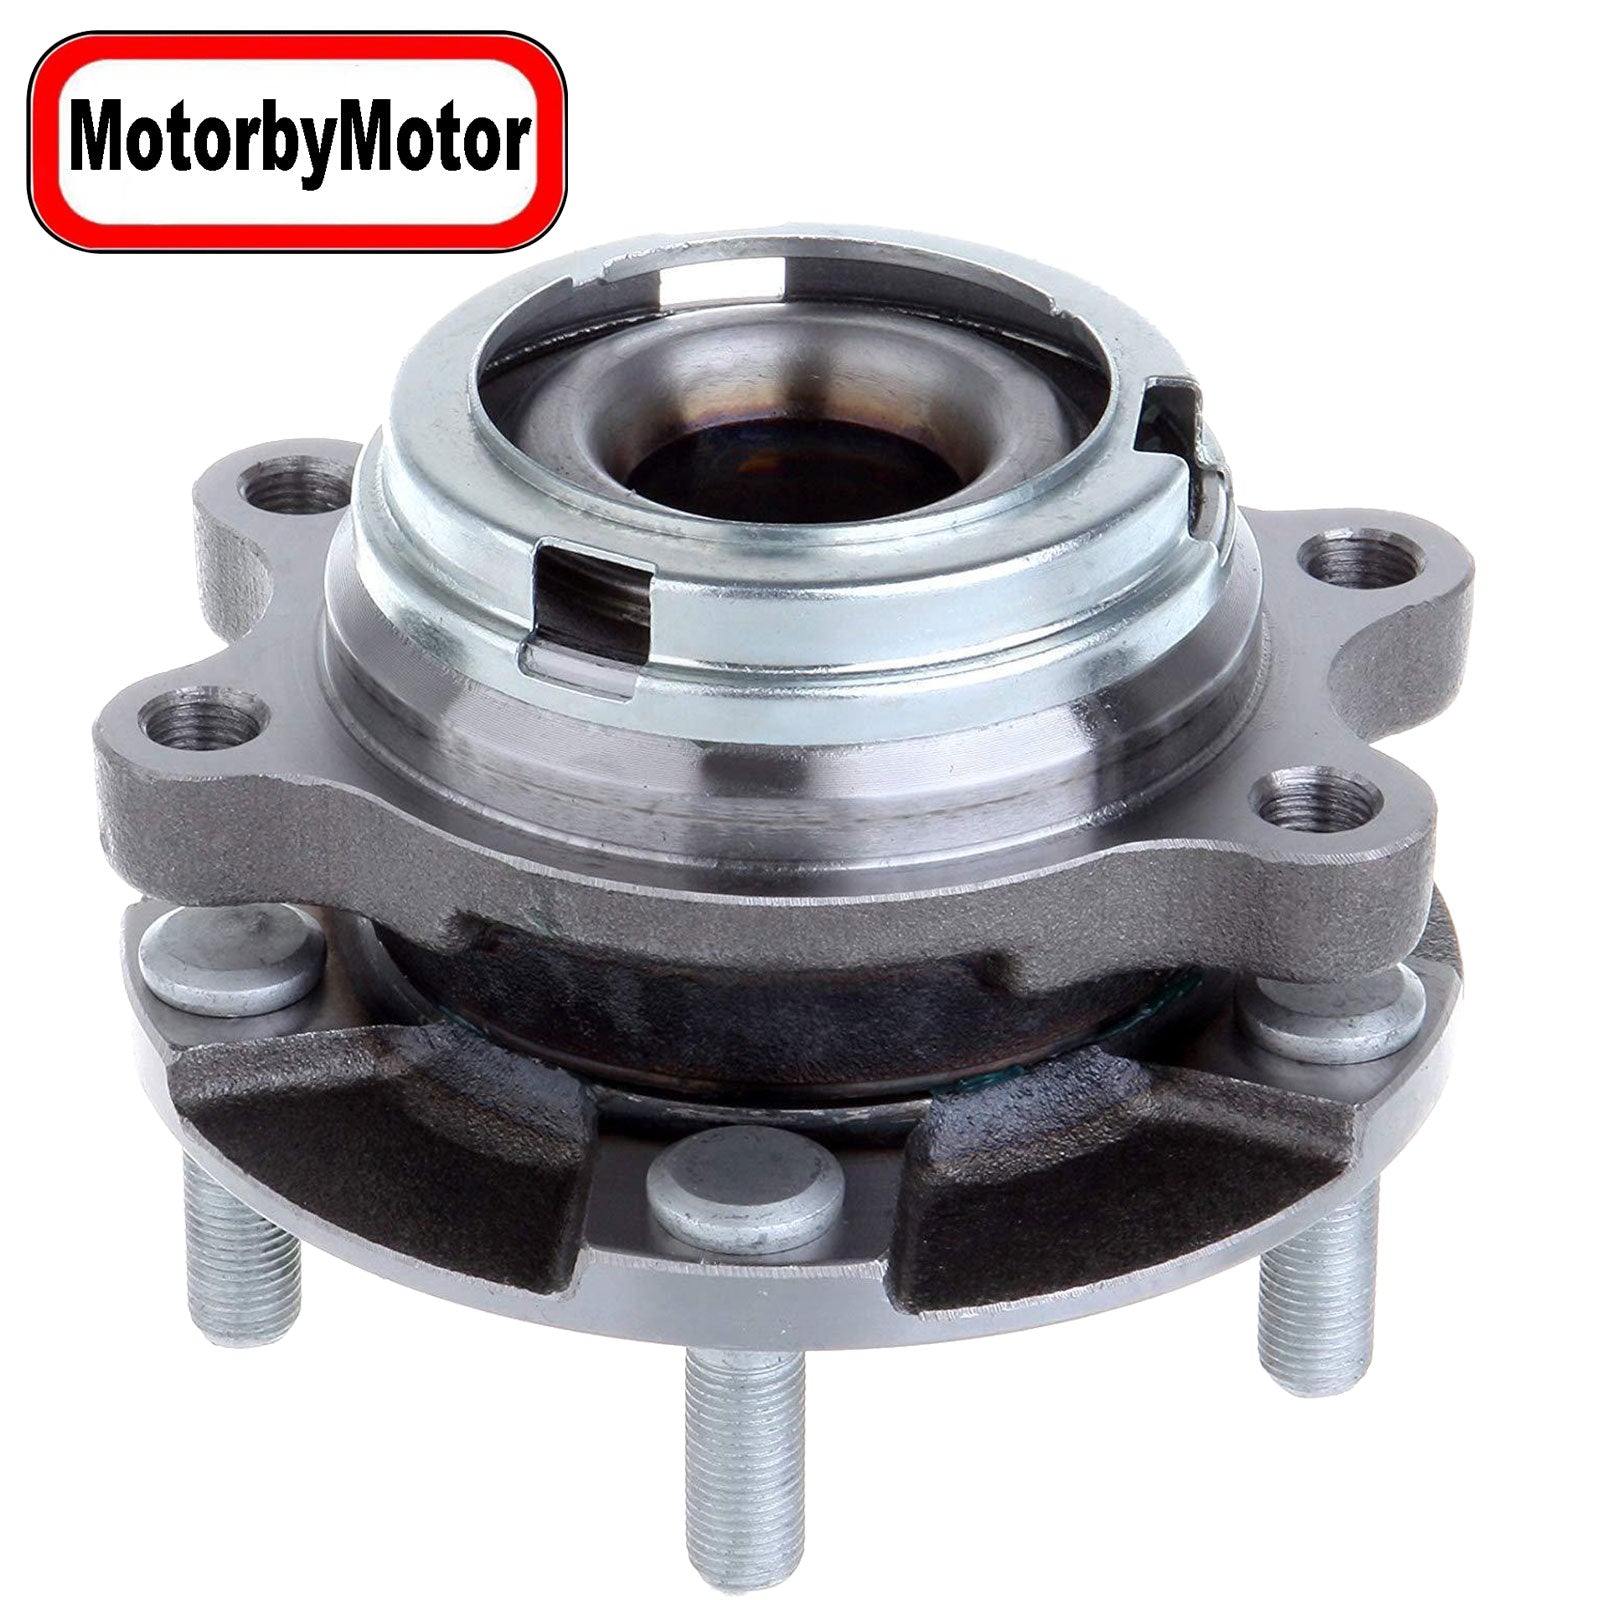 MotorbyMotor HA590125 Front Wheel Bearing and Hub Assembly AWD with 5 Lugs for Infiniti EX35 EX37 FX35 FX37 FX45 FX50 G25 G35 G37 M35 M37 M45 M56 Q40 Q50 Q60 Q70 Q70L QX50 QX70 Hub Bearing Assembly MotorbyMotor